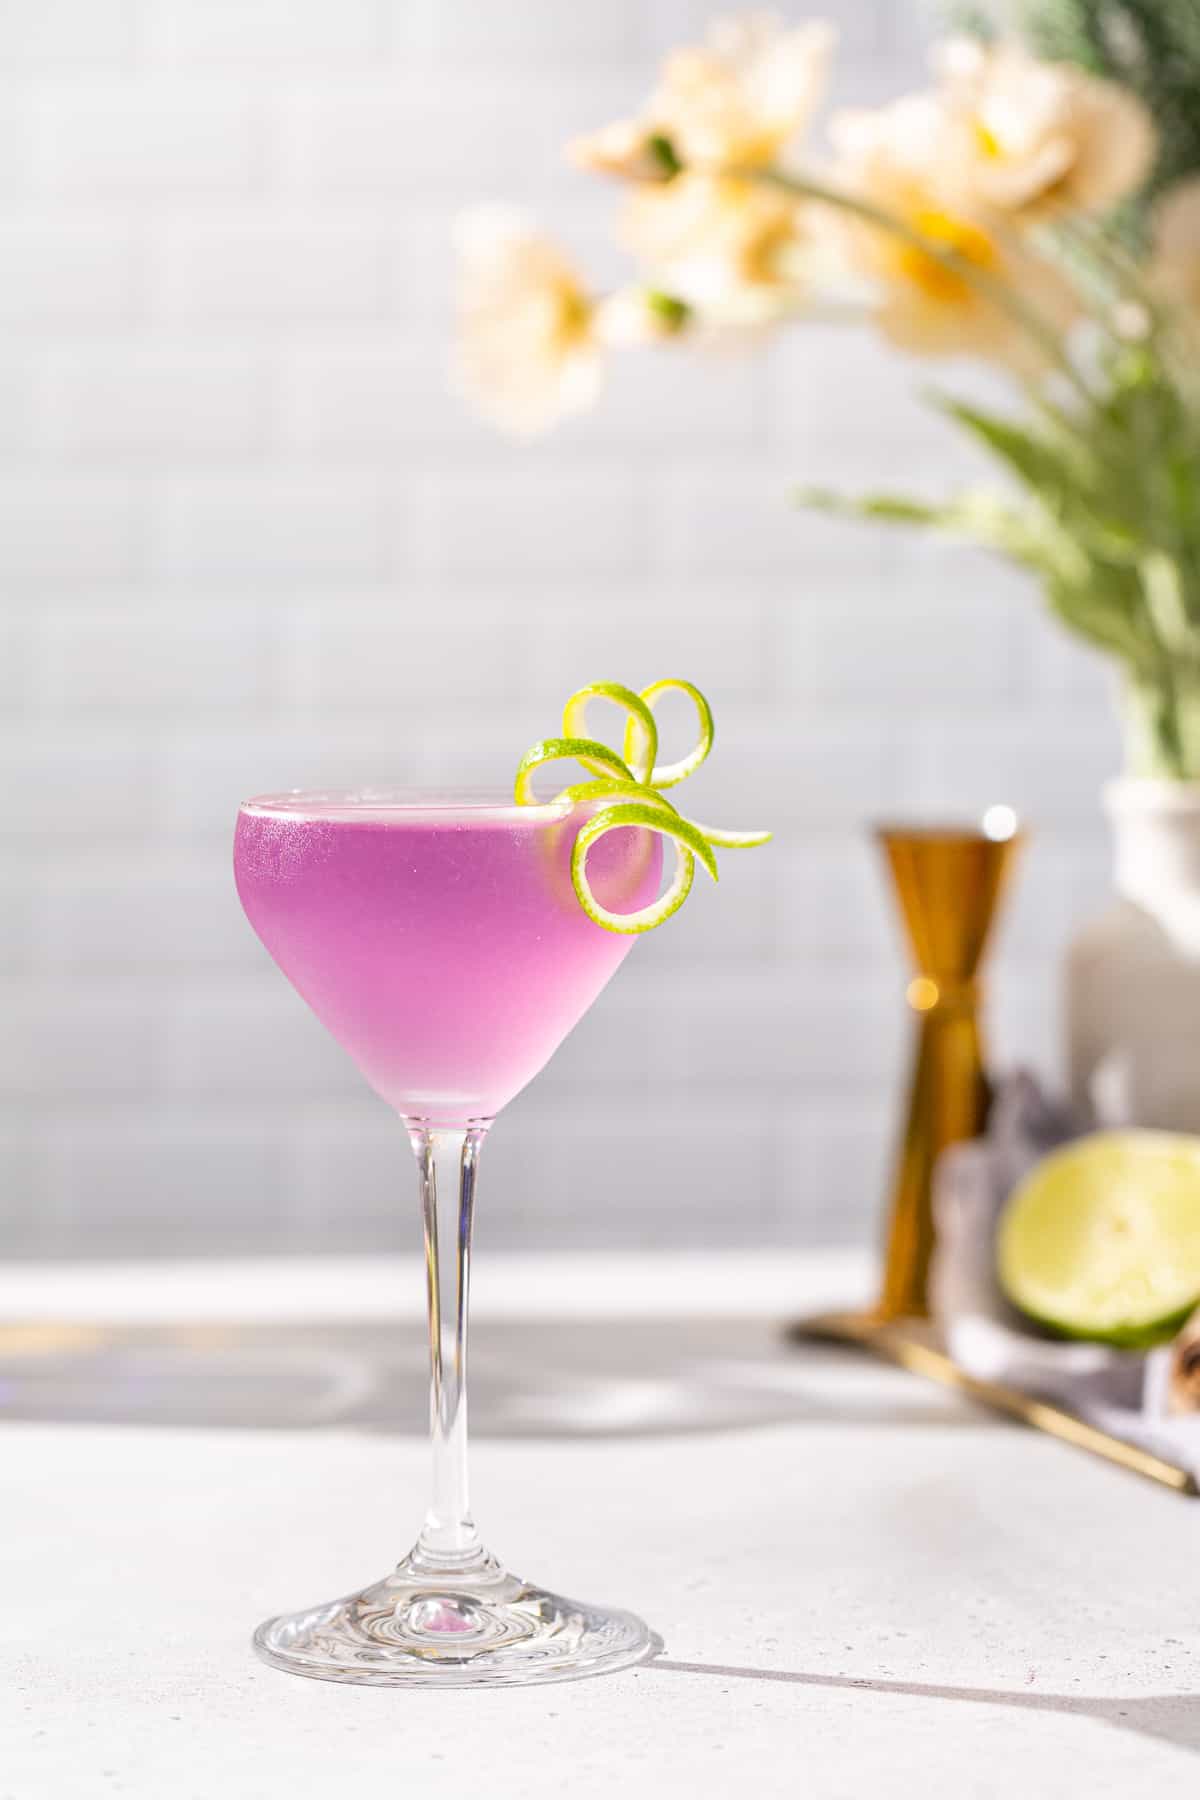 Side view of a French Gimlet cocktail on a countertop in a stemmed cocktail glass with a long curly lime peel garnish. The drink is purple in color. In the background are a gold jigger, cut lime and flowers in a vase.